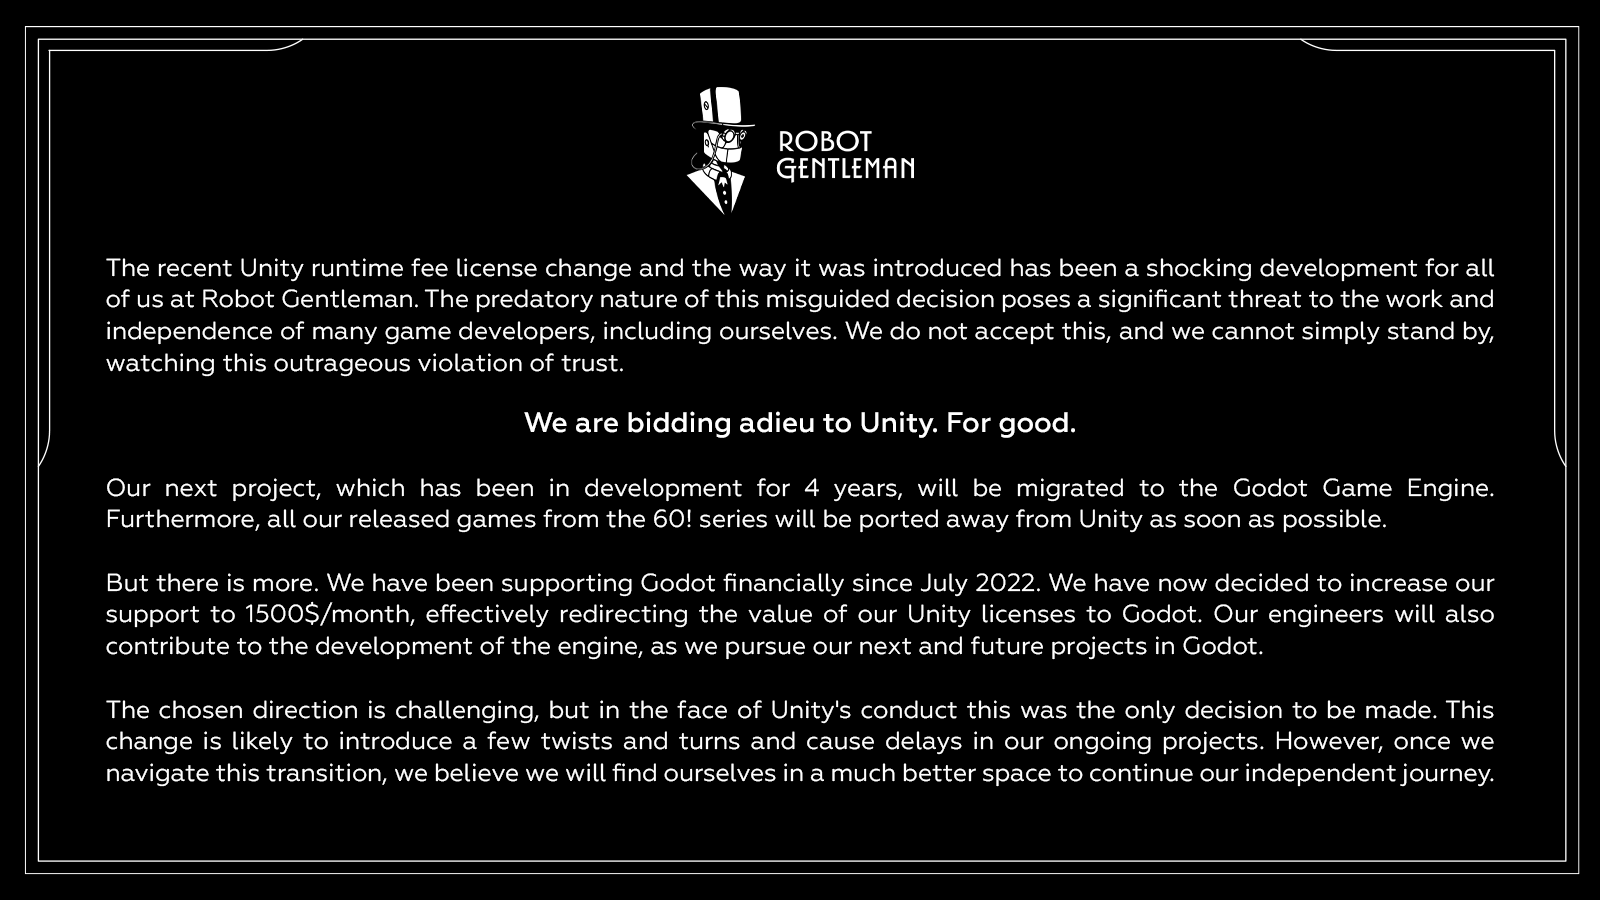 Statement : " ROBOT GENTLEMAN The recent Unity runtime fee license change and the way it was introduced has been a shocking development for all of us at Robot Gentleman. The predatory nature of this misguided decision poses a significant threat to the work and independence of many game developers, including ourselves. We do not accept this, and we cannot simply stand by, watching this outrageous violation of trust. We are bidding adieu to Unity. For good. Our next project, which has been in development for 4 years, will be migrated to the Godot Game Engine. Furthermore, all our released games from the 60! series will be ported away from Unity as soon as possible. But there is more. We have been supporting Godot financially since July 2022. We have now decided to increase our support to 1500$/month, effectively redirecting the value of our Unity licenses to Godot. Our engineers will also contribute to the development of the engine, as we pursue our next and future projects in Godot. The chosen direction is challenging, but in the face of Unity's conduct this was the only decision to be made. This change is likely to introduce a few twists and turns and cause delays in our ongoing projects. However, once we navigate this transition, we believe we will find ourselves in a much better space to continue our independent journey. "